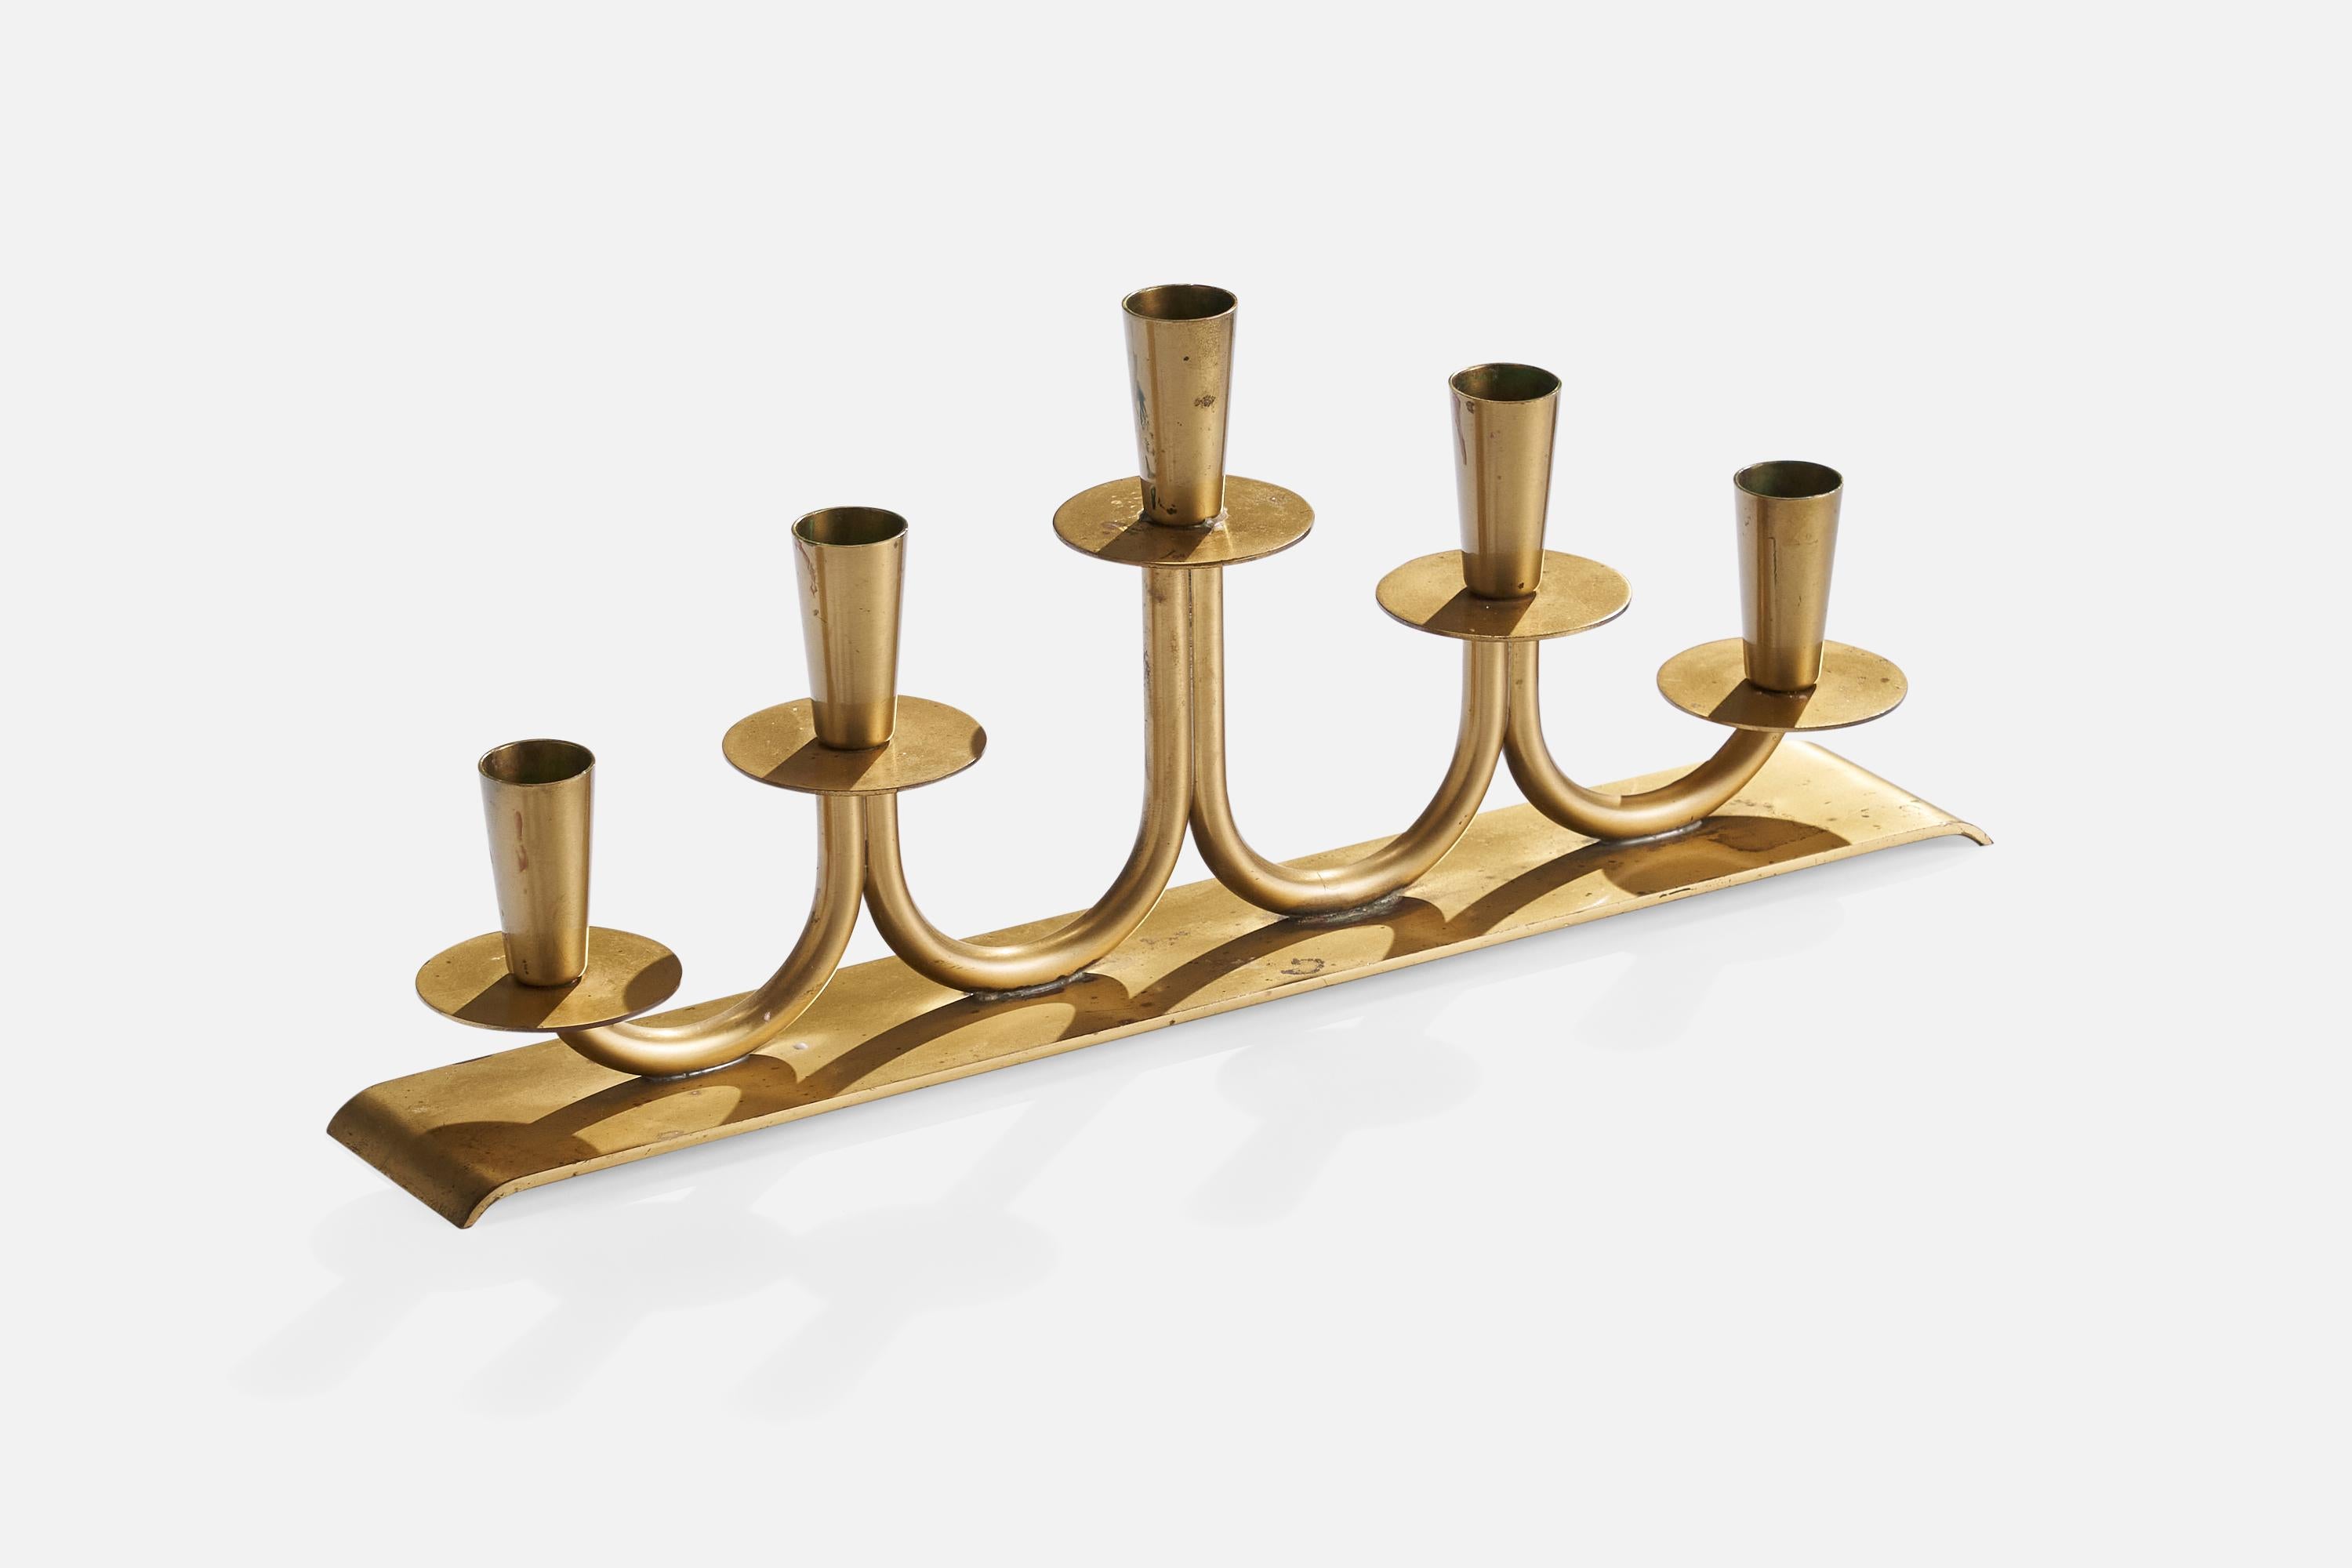 A brass candelabra designed by Walter Andersson and produced by Ystad-Metall, Sweden, c. 1950s.

Holds .8” candles.